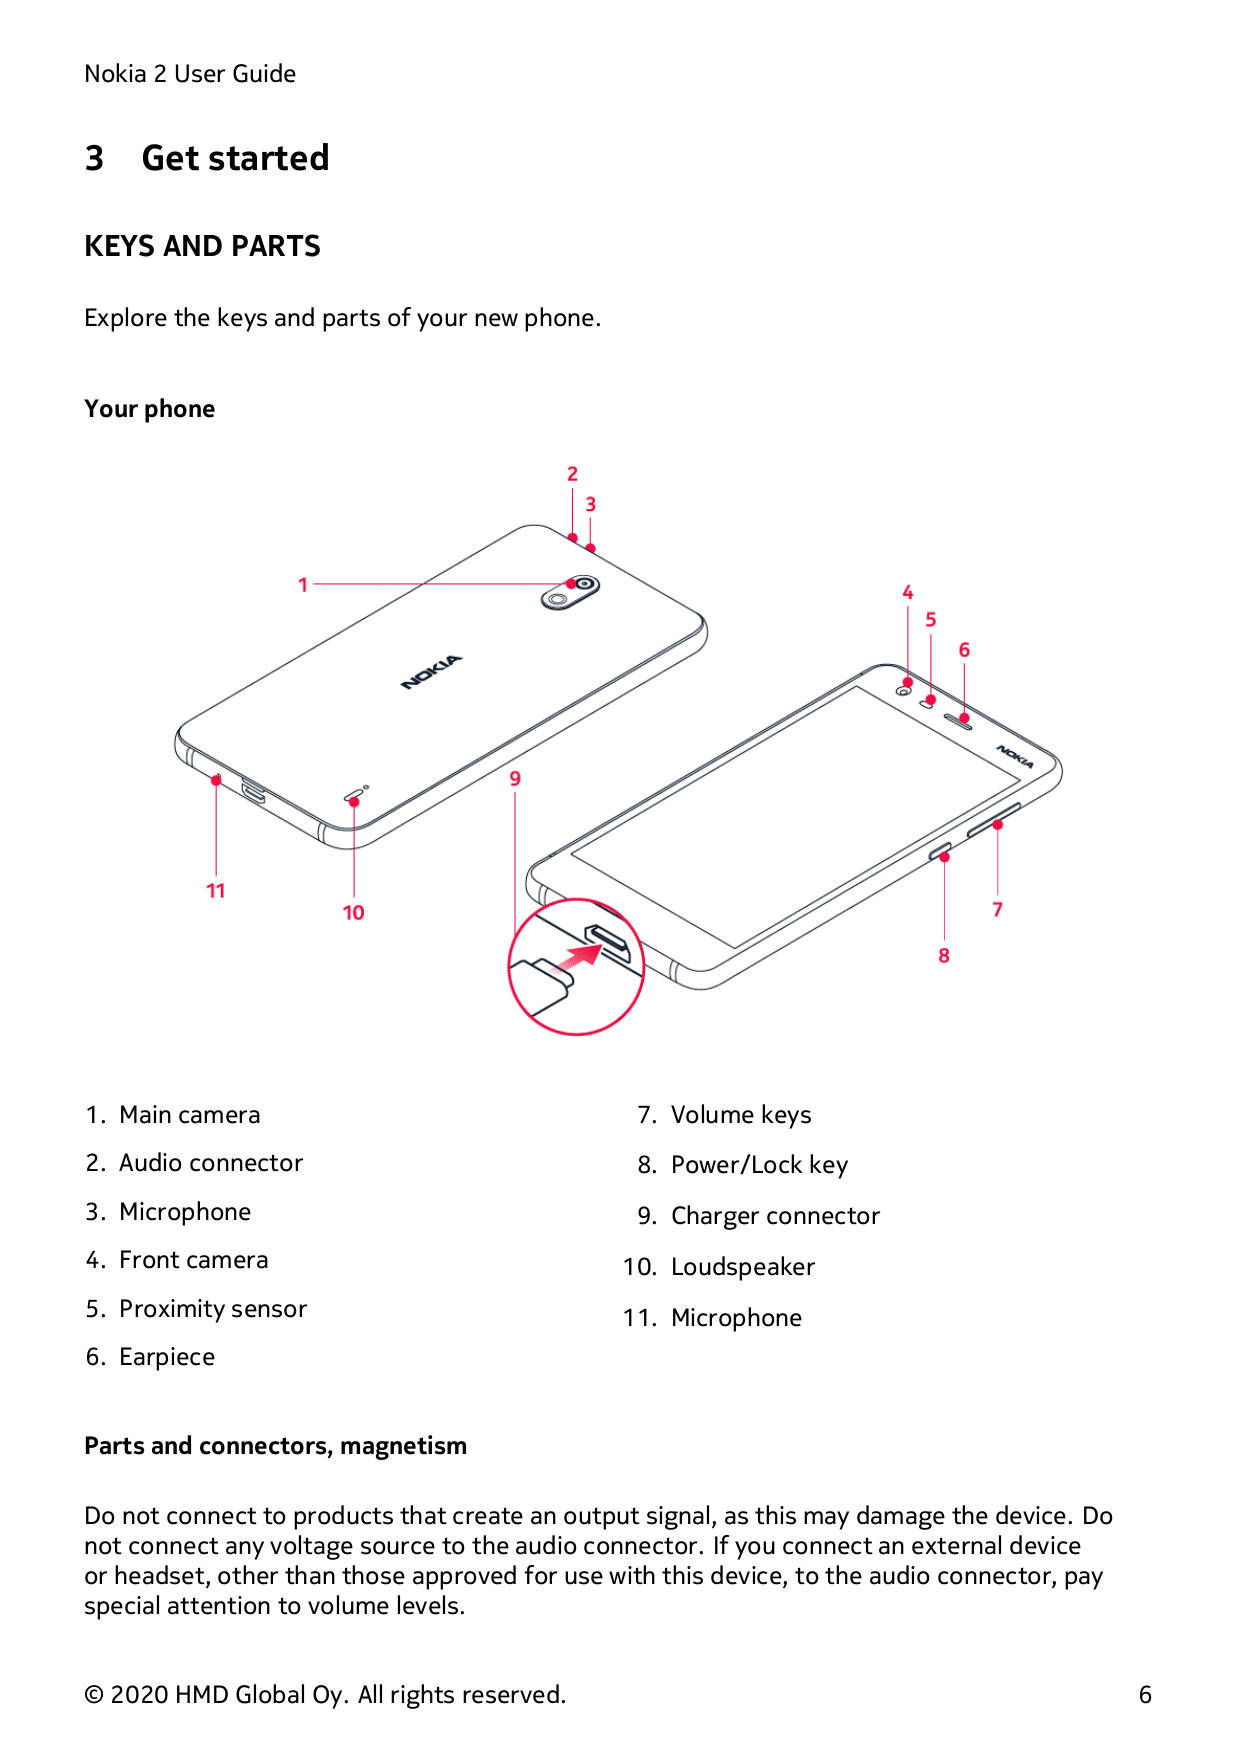 Nokia 2 User Guide3Get startedKEYS AND PARTSExplore the keys and parts of your new phone.Your phone1. Main camera7. Volume keys2